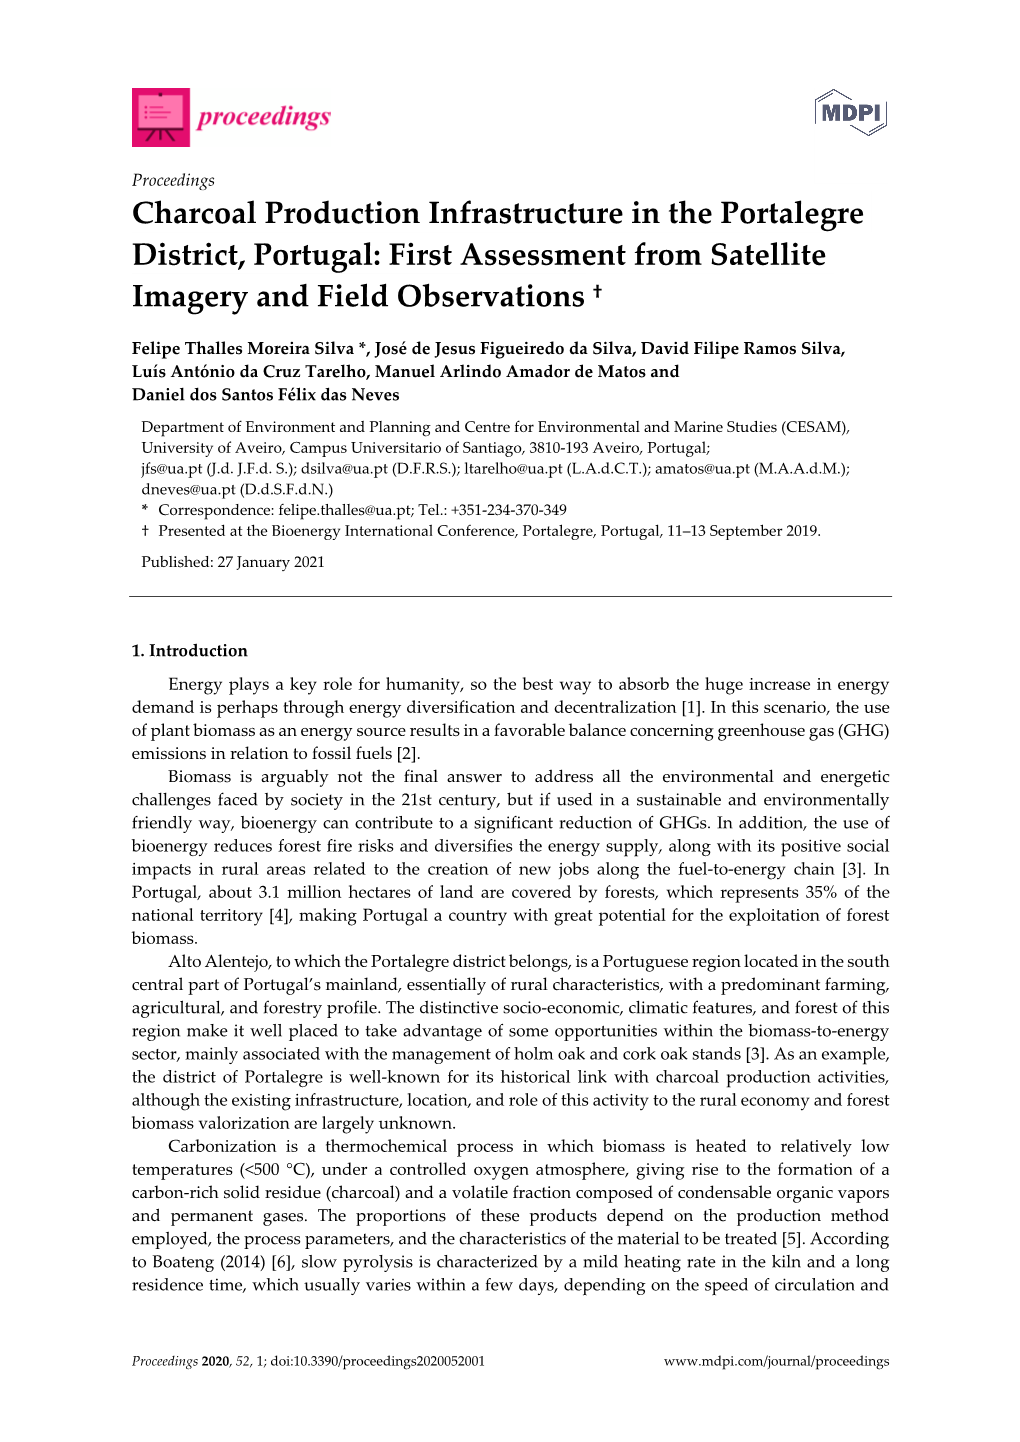 Charcoal Production Infrastructure in the Portalegre District, Portugal: First Assessment from Satellite Imagery and Field Observations †